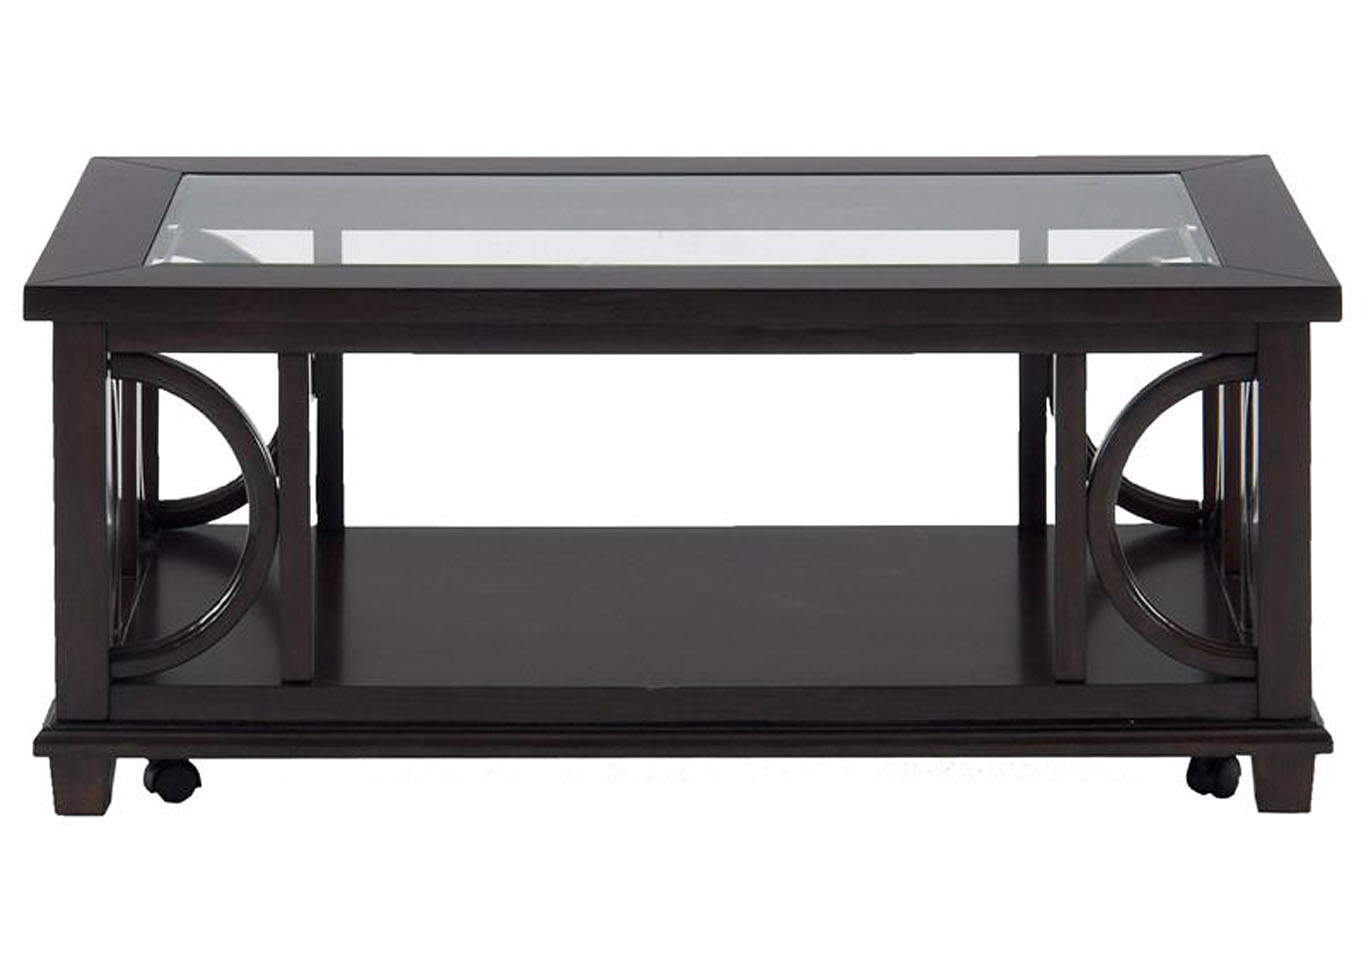 Belize Contemporary Coffee Table,Instore